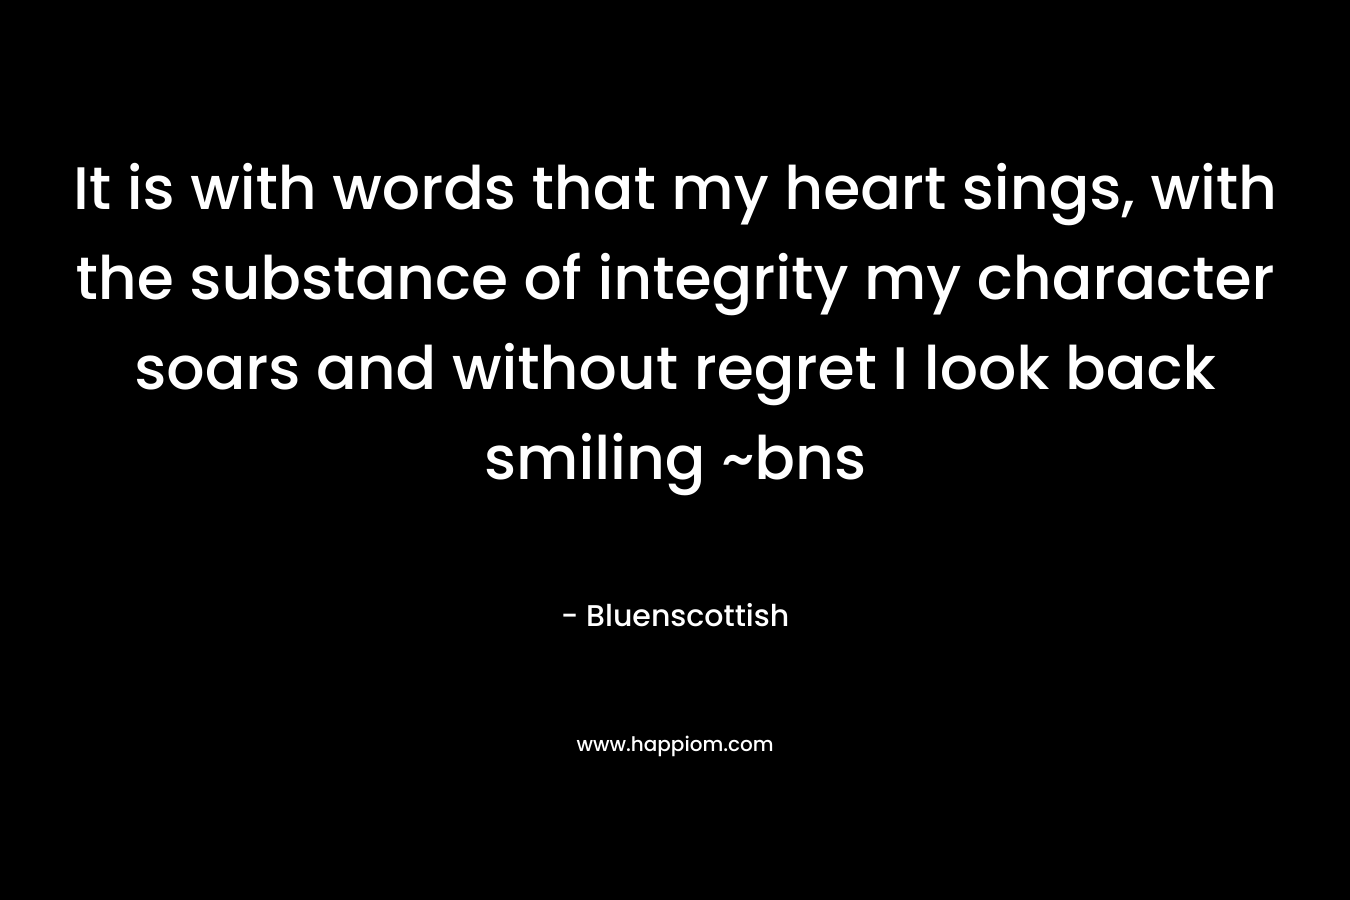 It is with words that my heart sings, with the substance of integrity my character soars and without regret I look back smiling ~bns